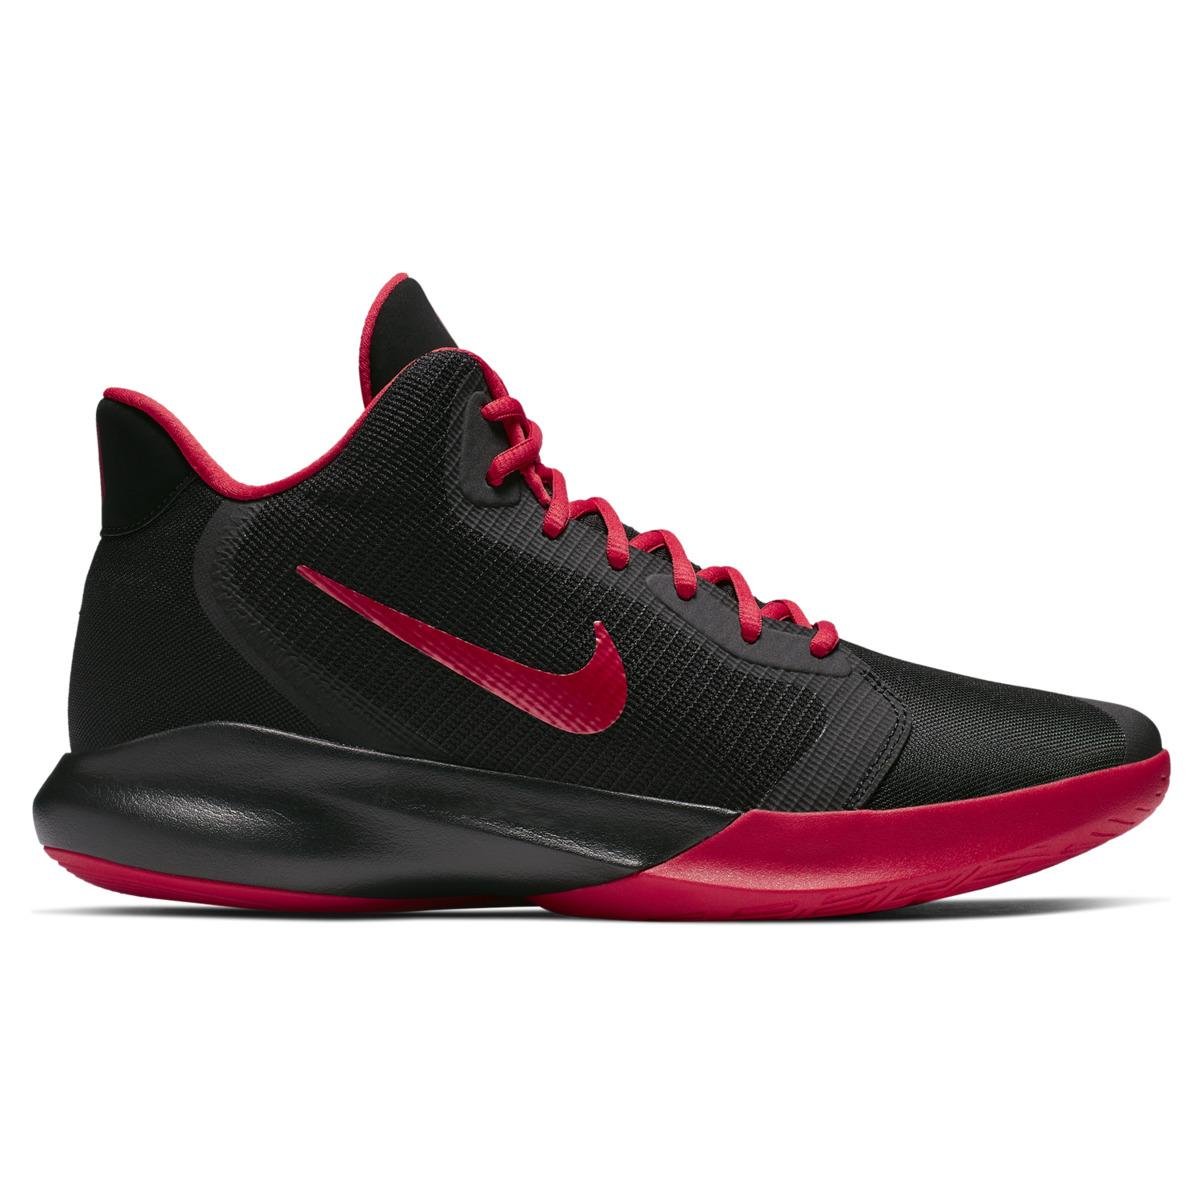 Nike Precision Iii Basketball Shoes in Red for Men - Save 35% - Lyst